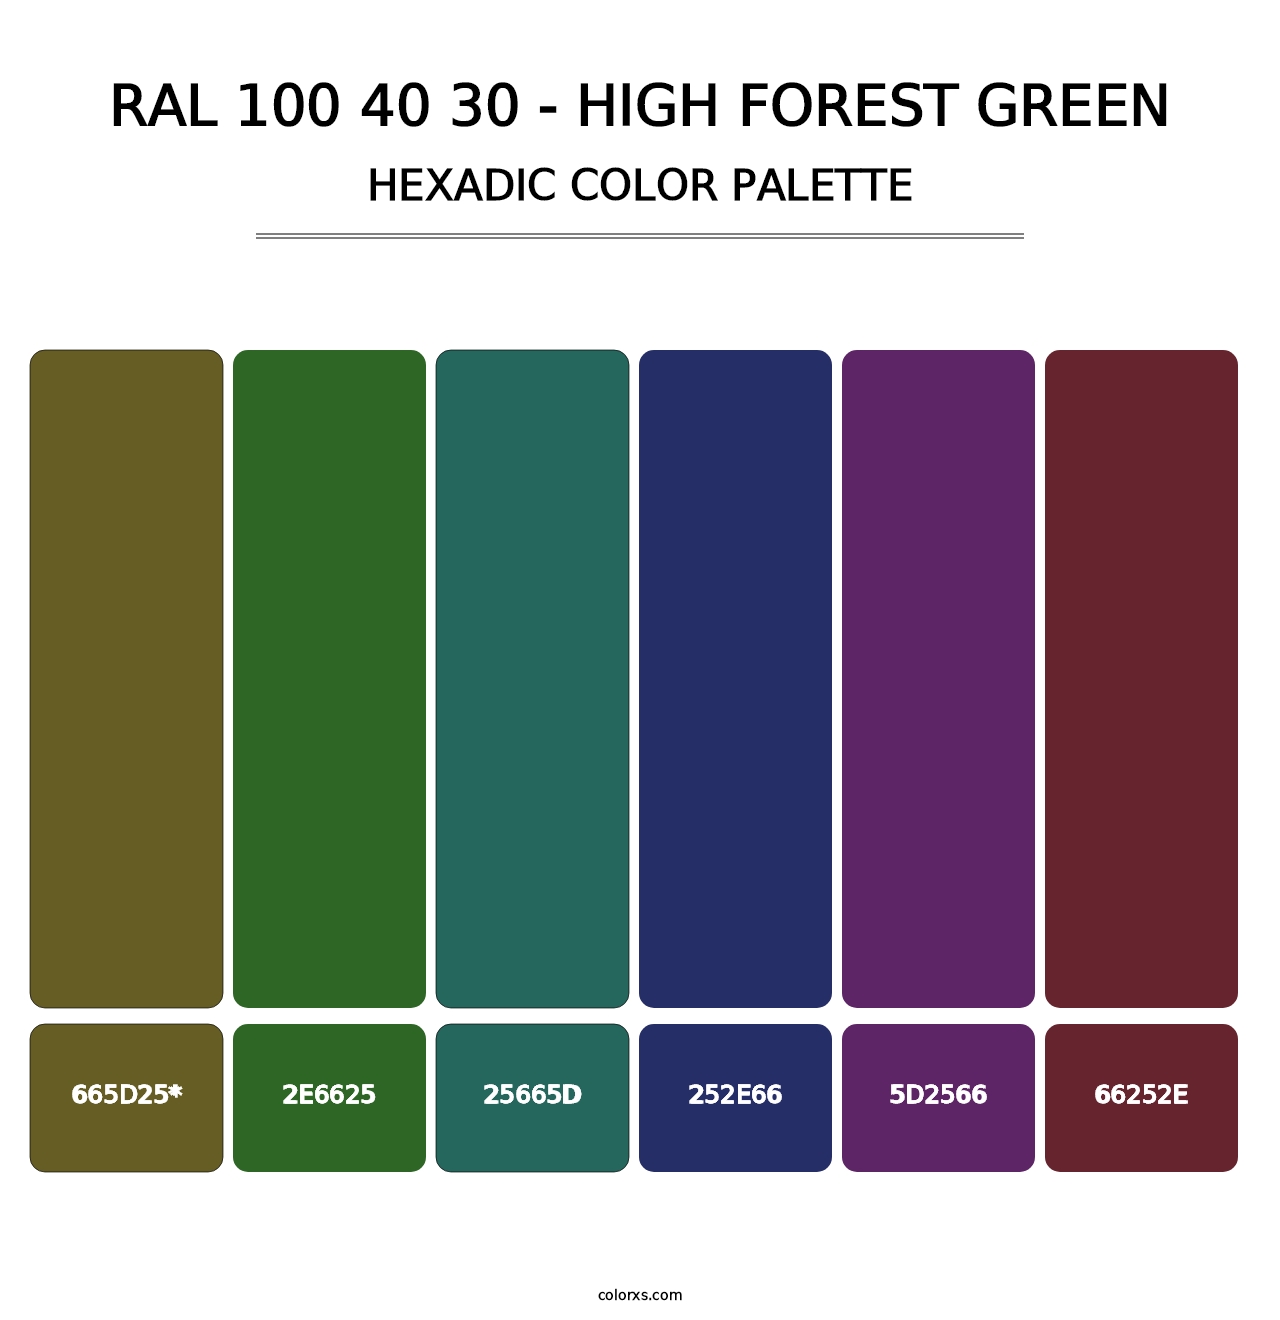 RAL 100 40 30 - High Forest Green - Hexadic Color Palette